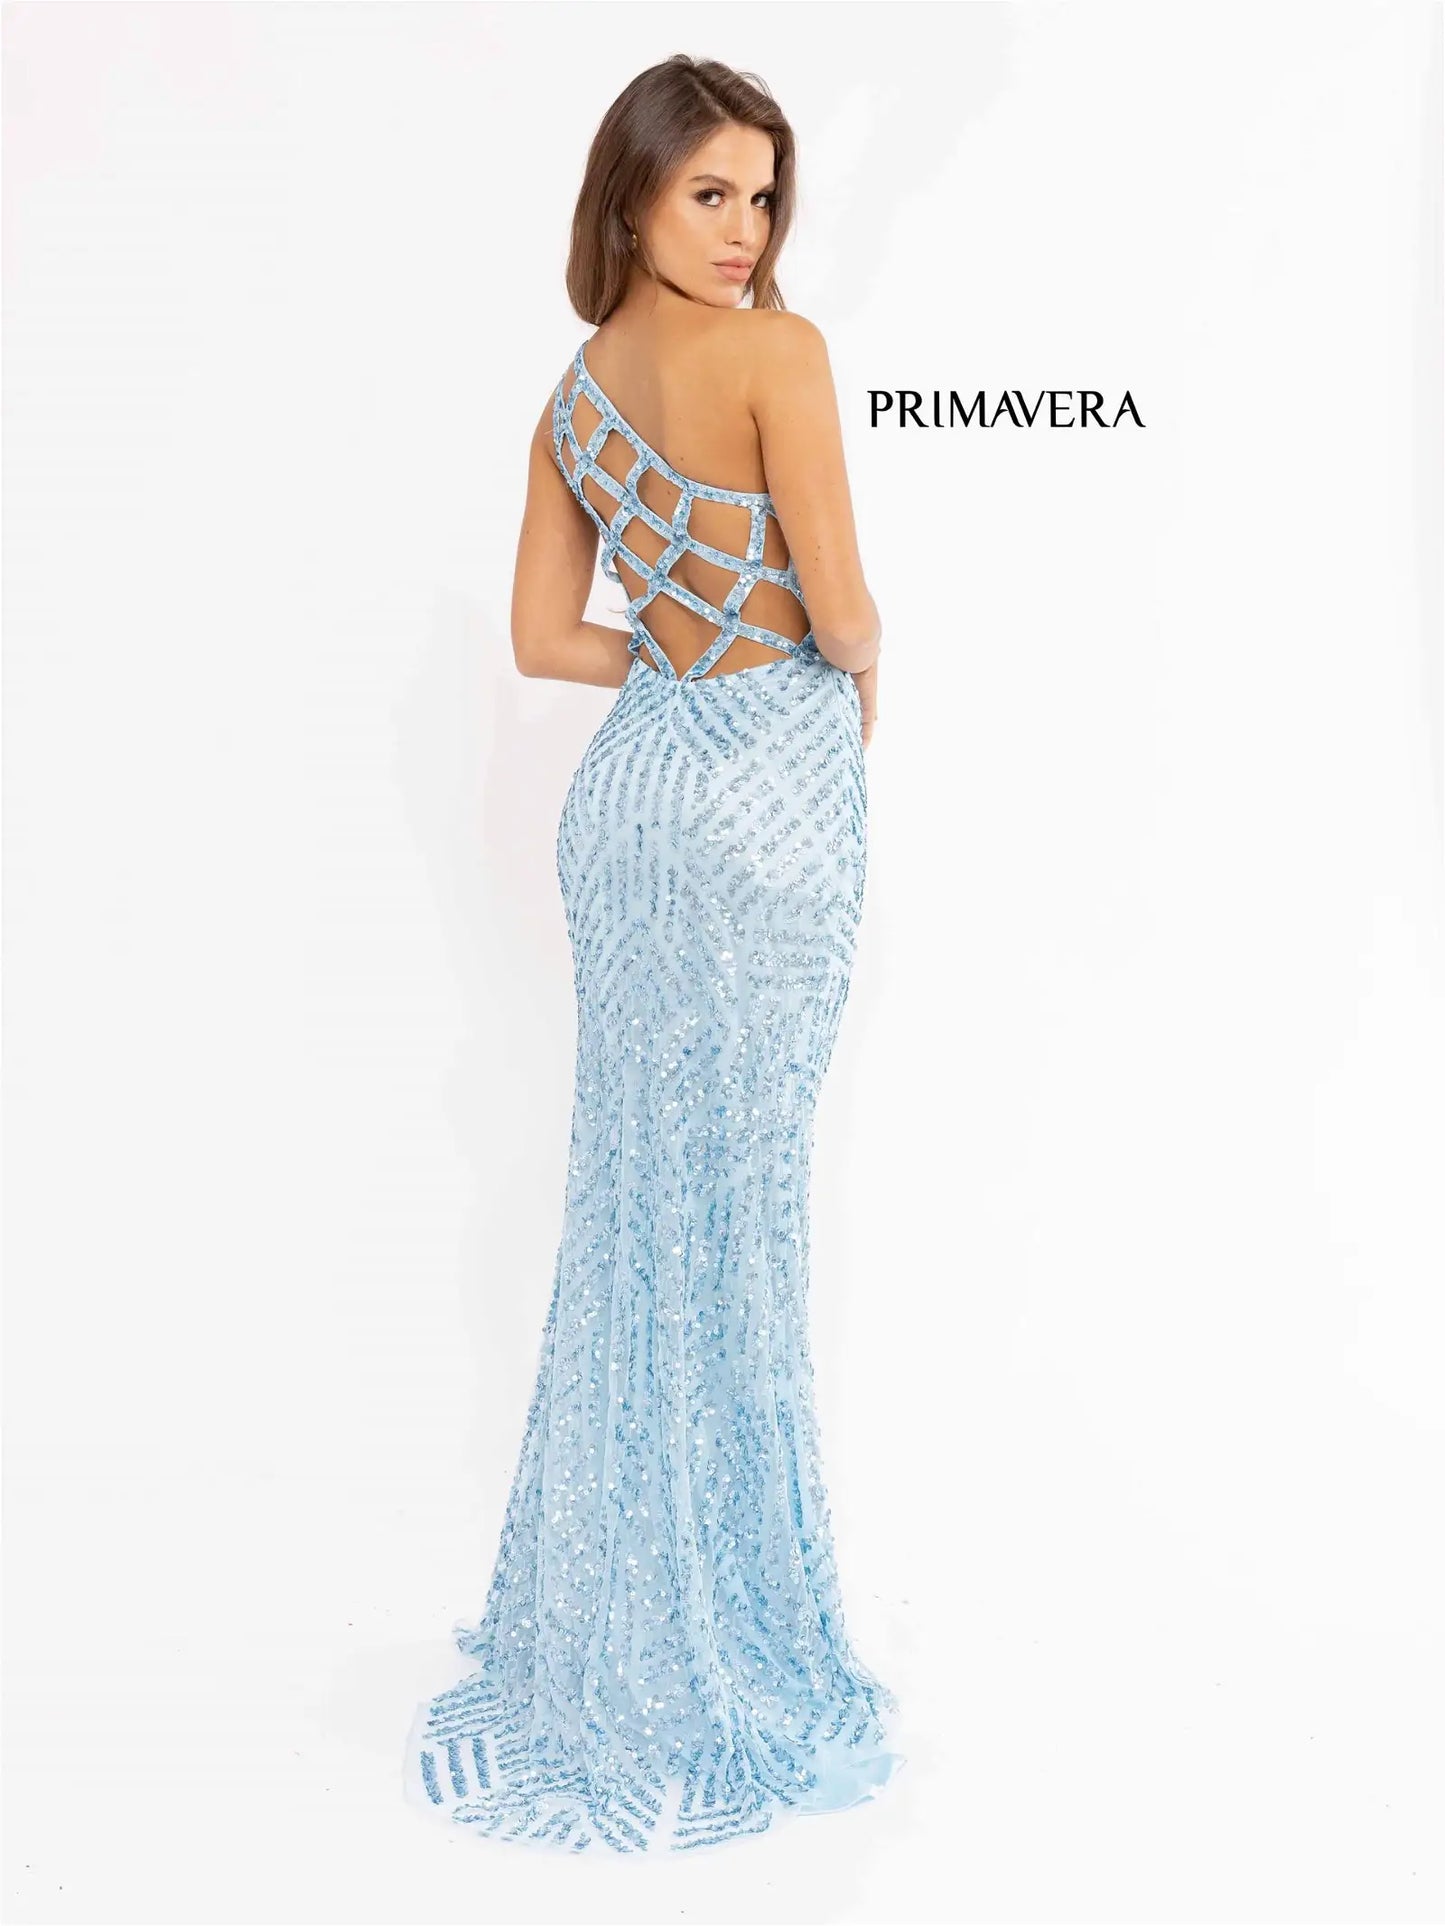 Primavera Couture 3951 Prom Dress Long Beaded Dress. This Gown has a beautiful one shoulder it has a gorgeous se design going down the dress. 